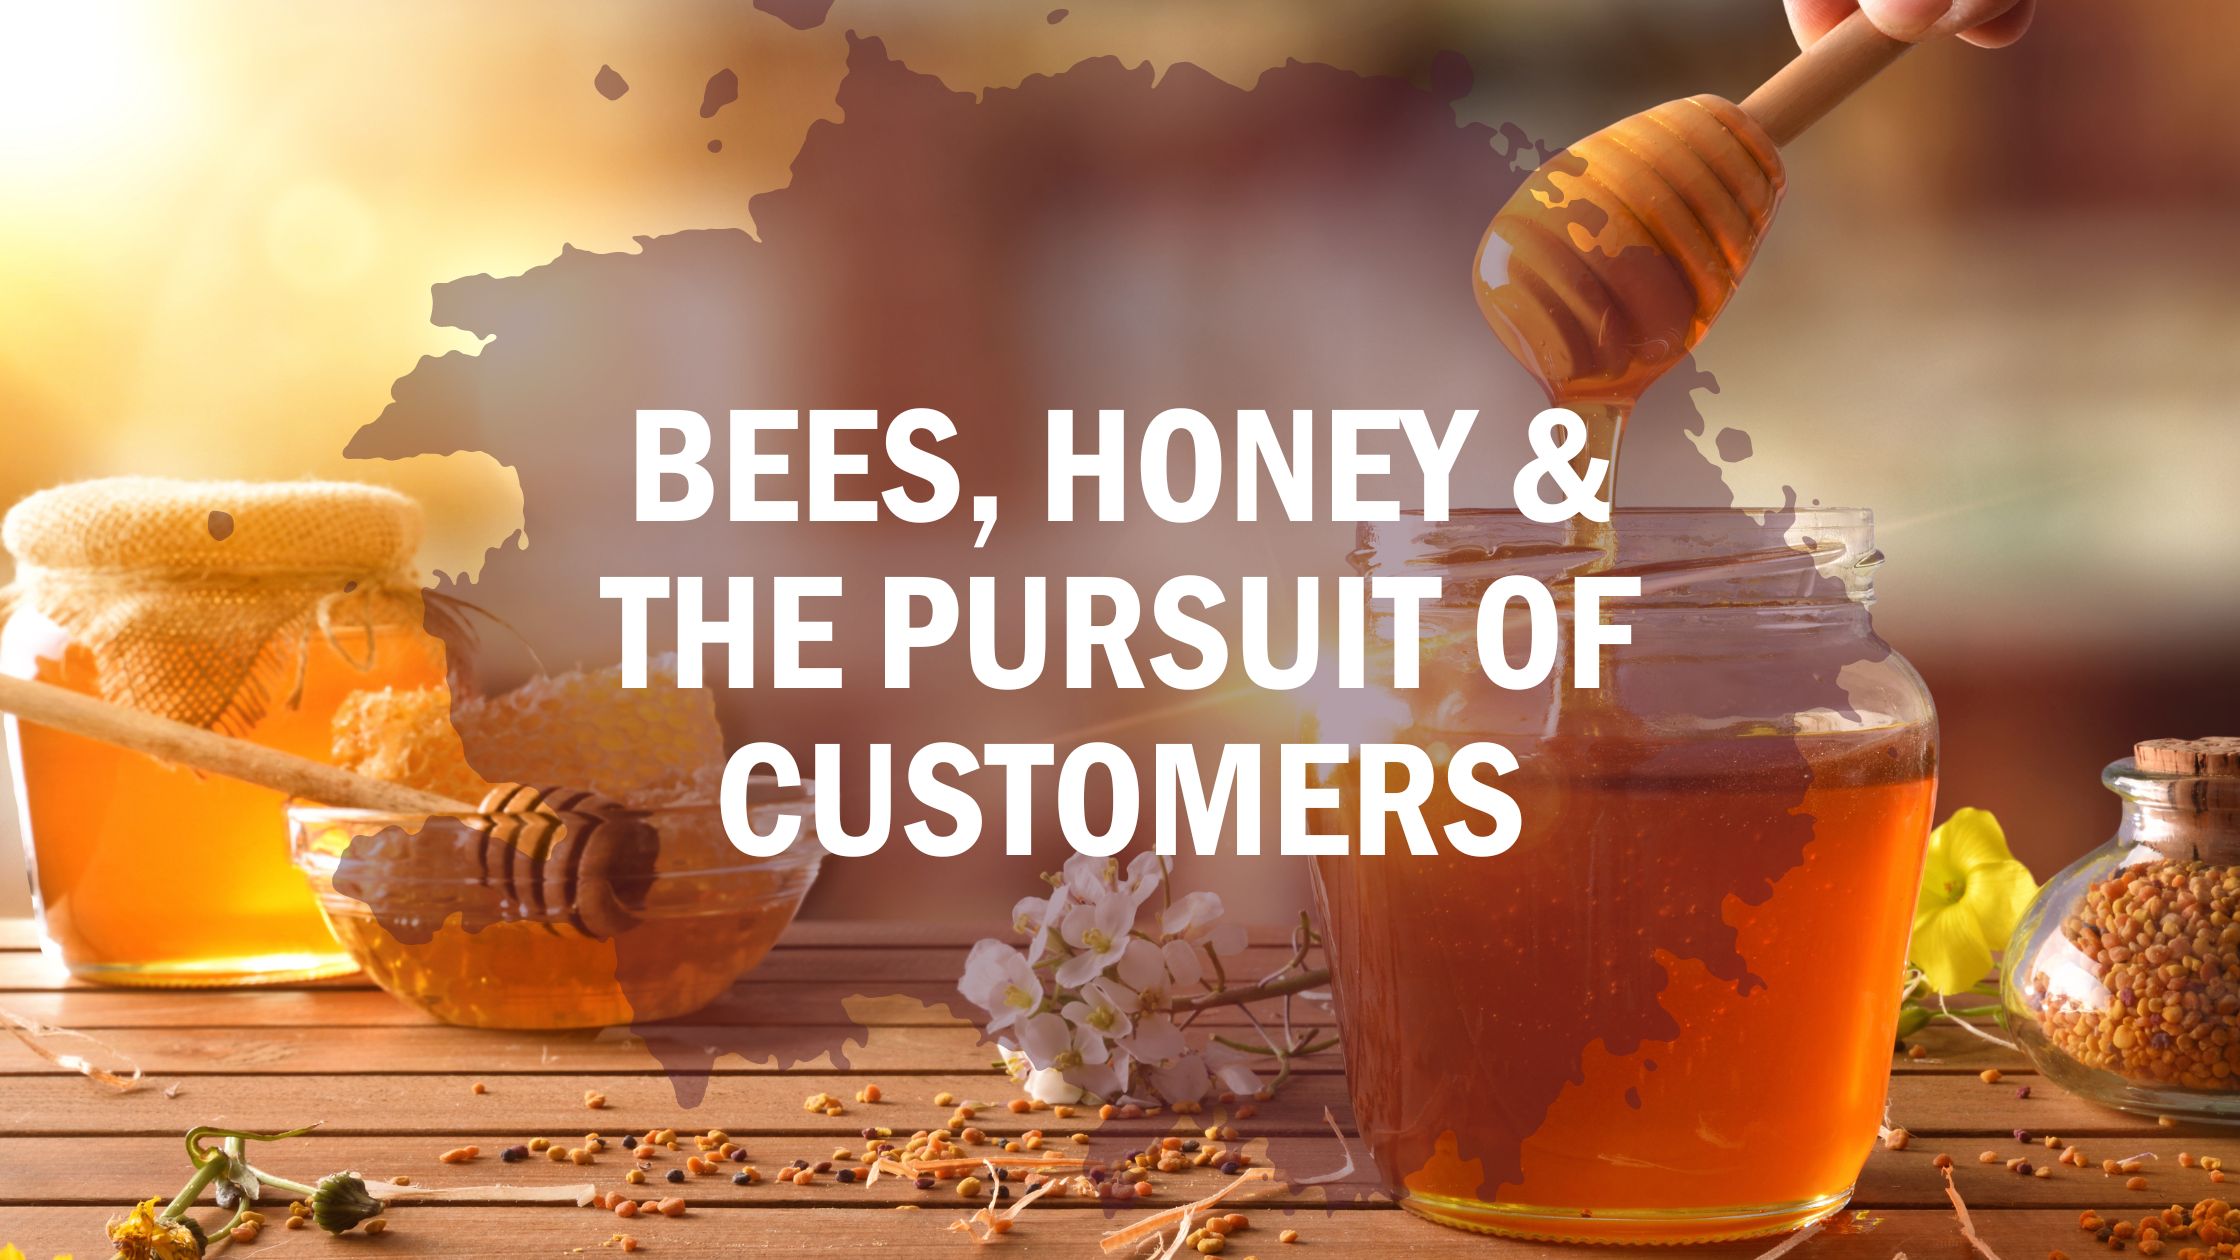 Bees, Honey & the Pursuit of Customers